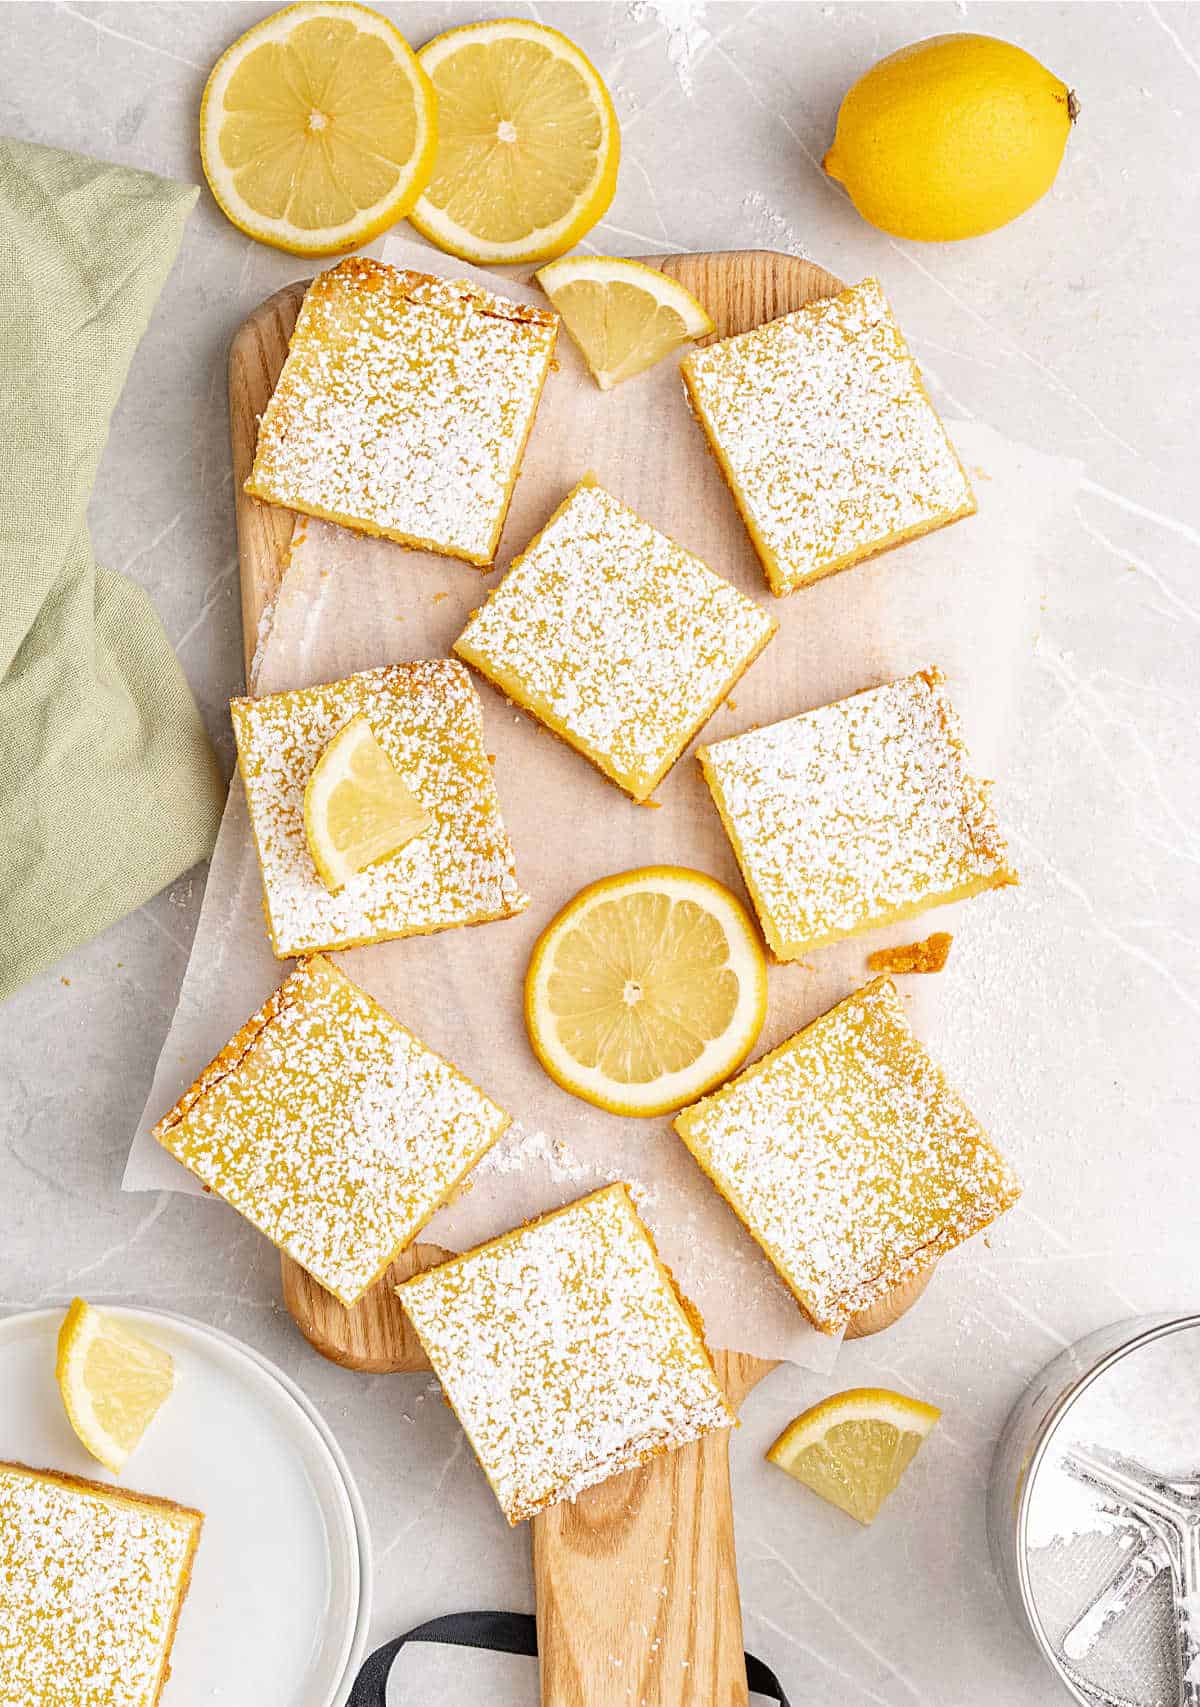 Top view of powdered sugar covered lemon bars on a wooden board. Light gray surface.